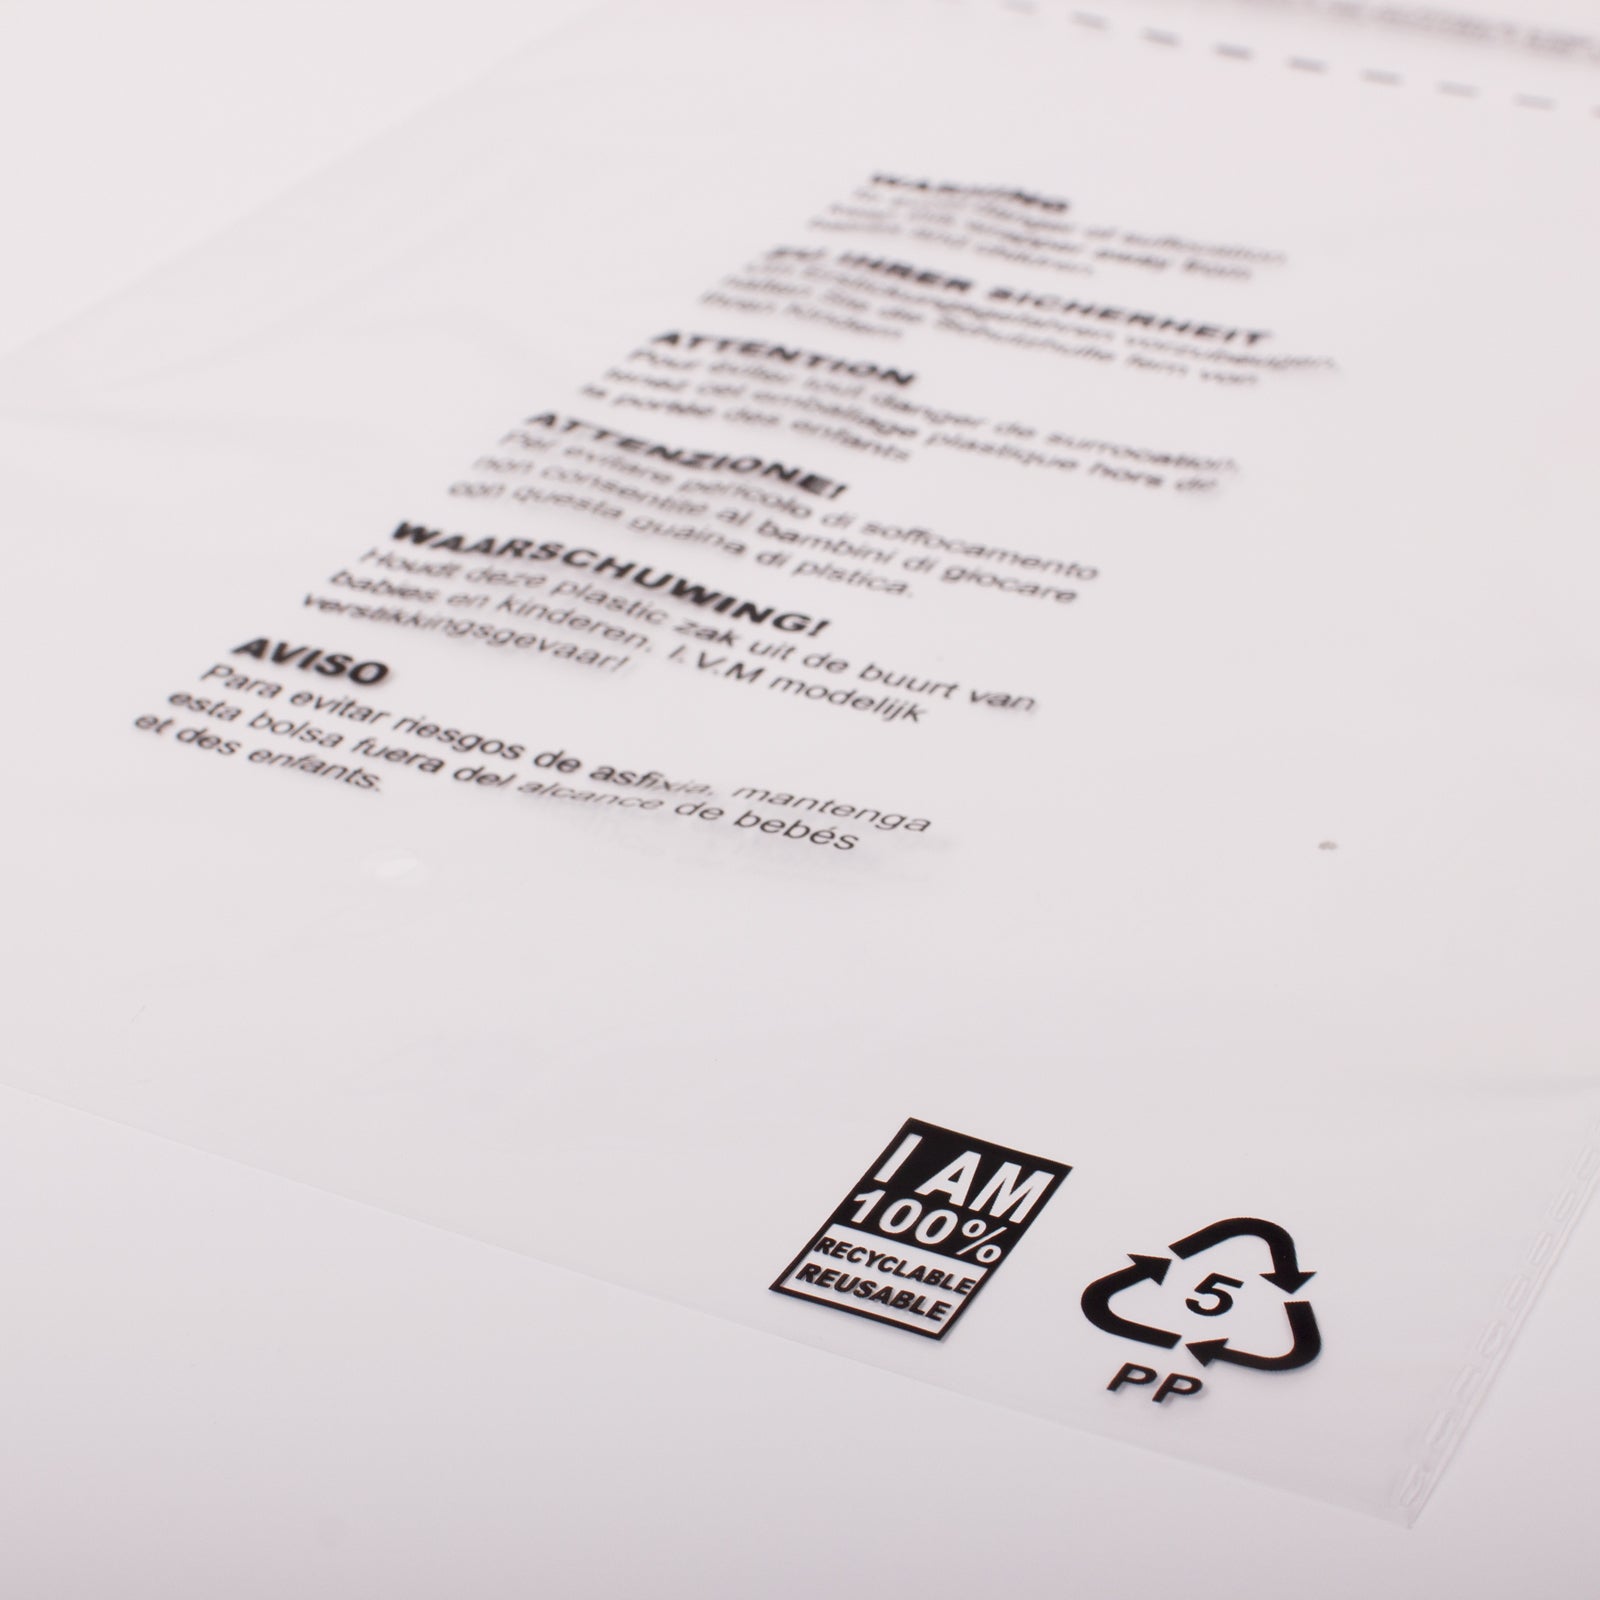 14 x 17 Clear Mailing Bag with 'I AM 100% RECYCLABLE'